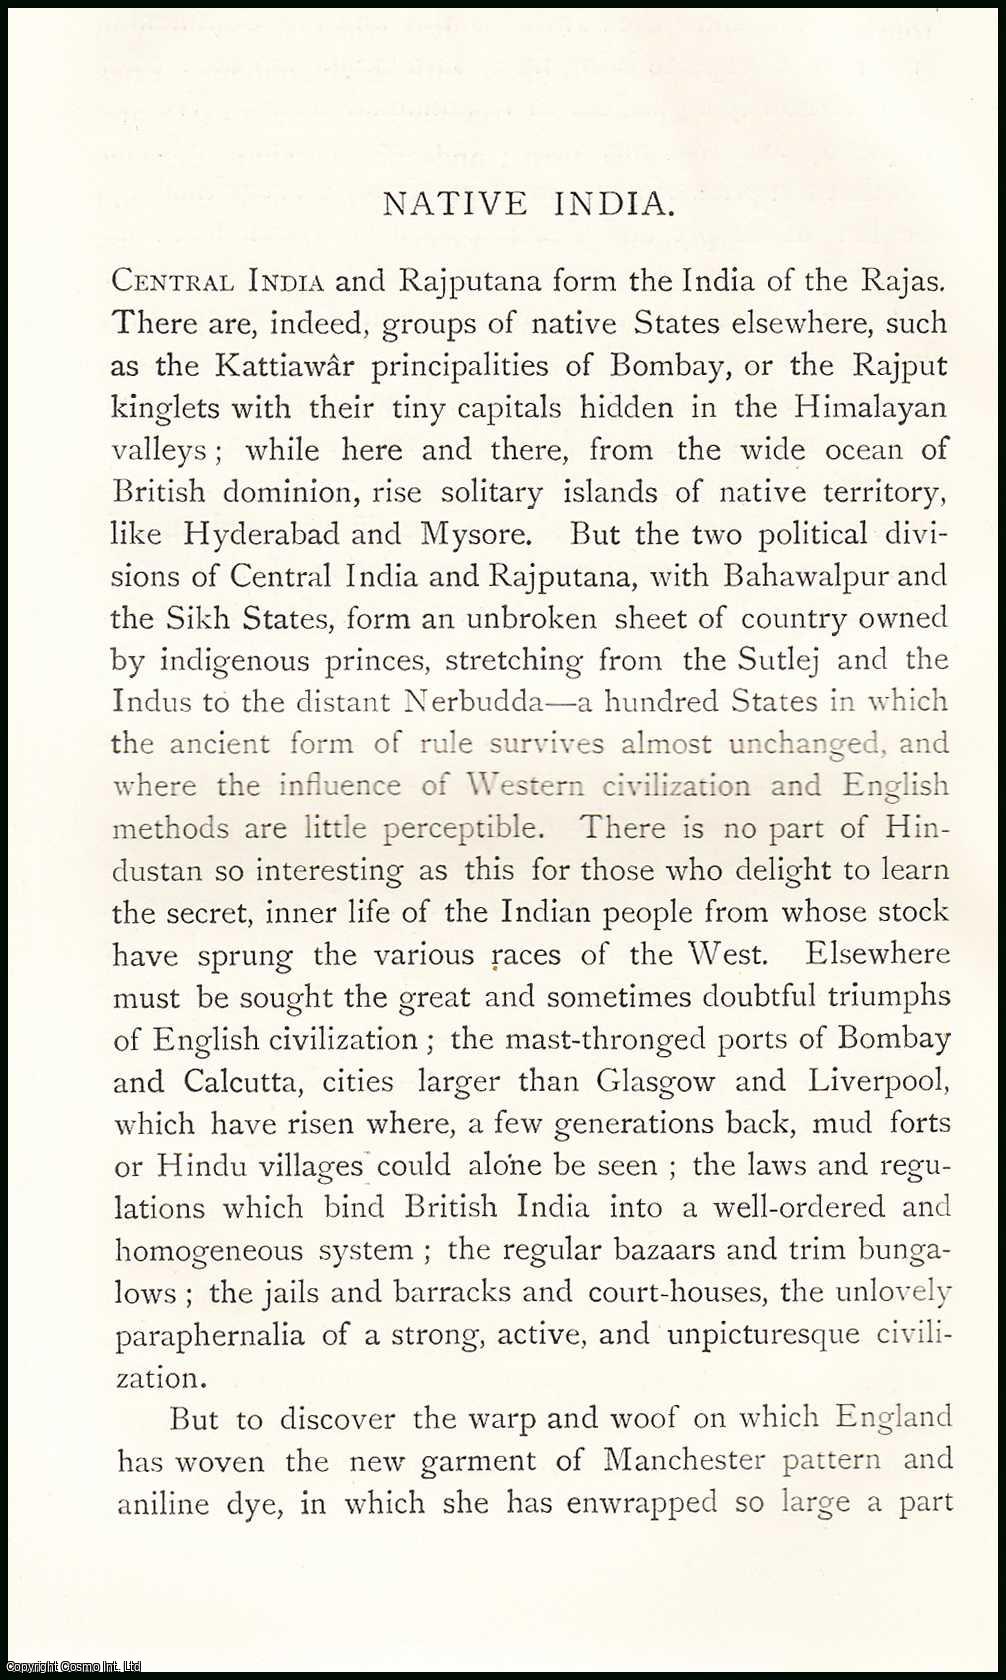 Lepel Griffin - Native India : Central India & Rajputana form the India of the Rajas. An uncommon original article from The Asiatic Quarterly Review, 1886.